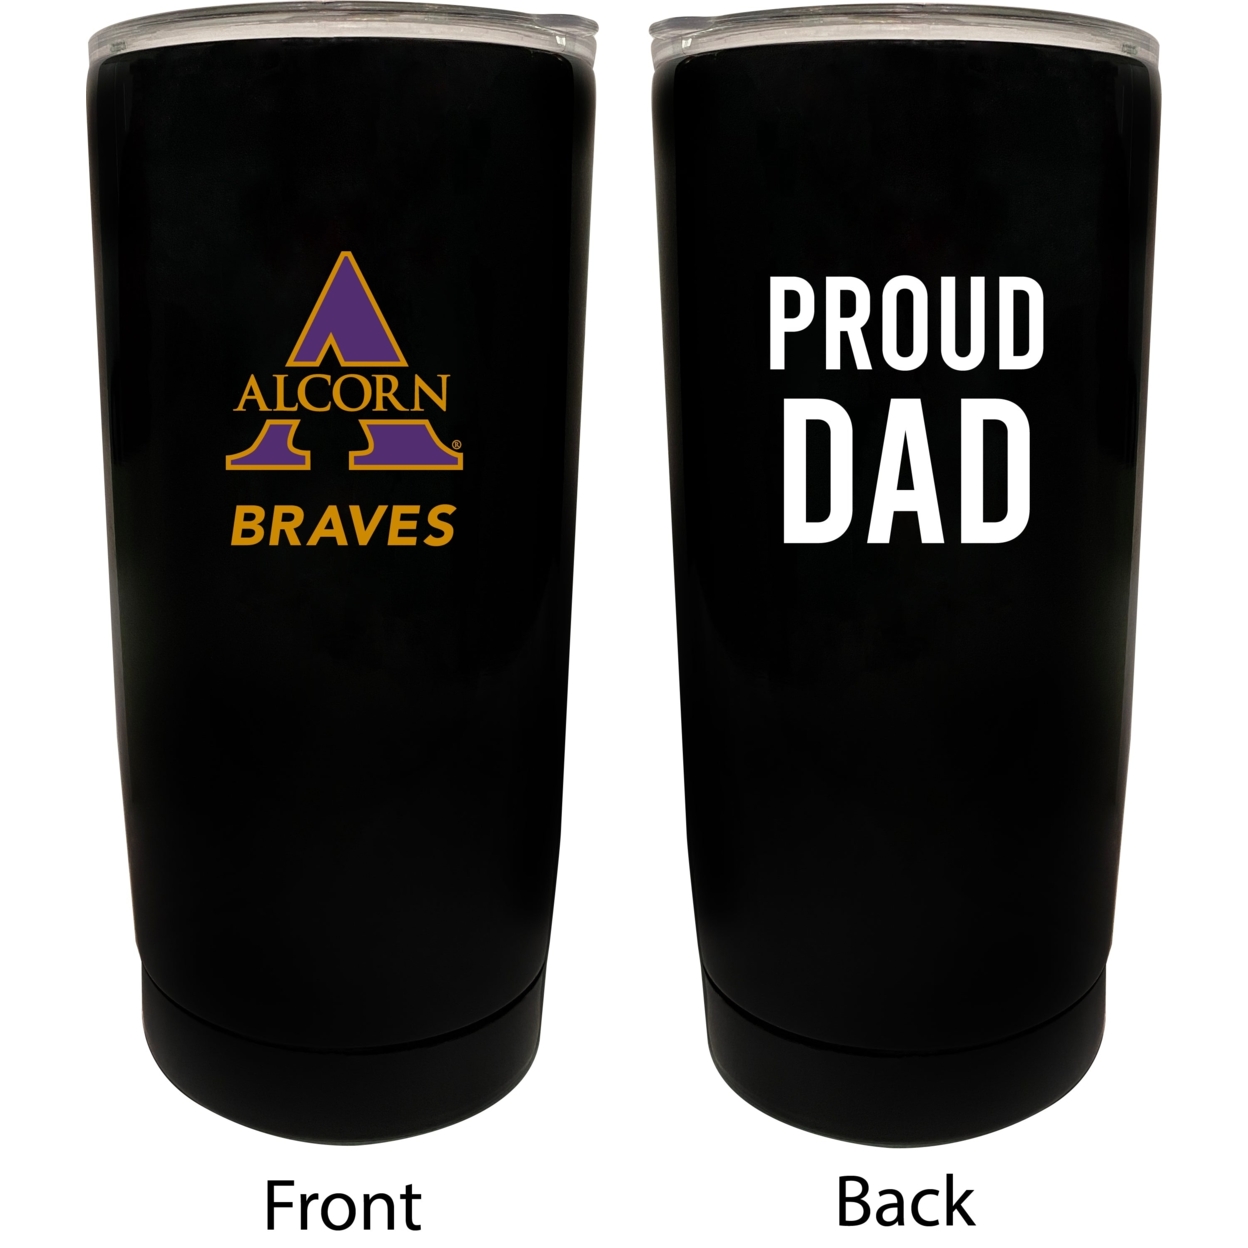 Alcorn State Braves Proud Dad 16 Oz Insulated Stainless Steel Tumblers